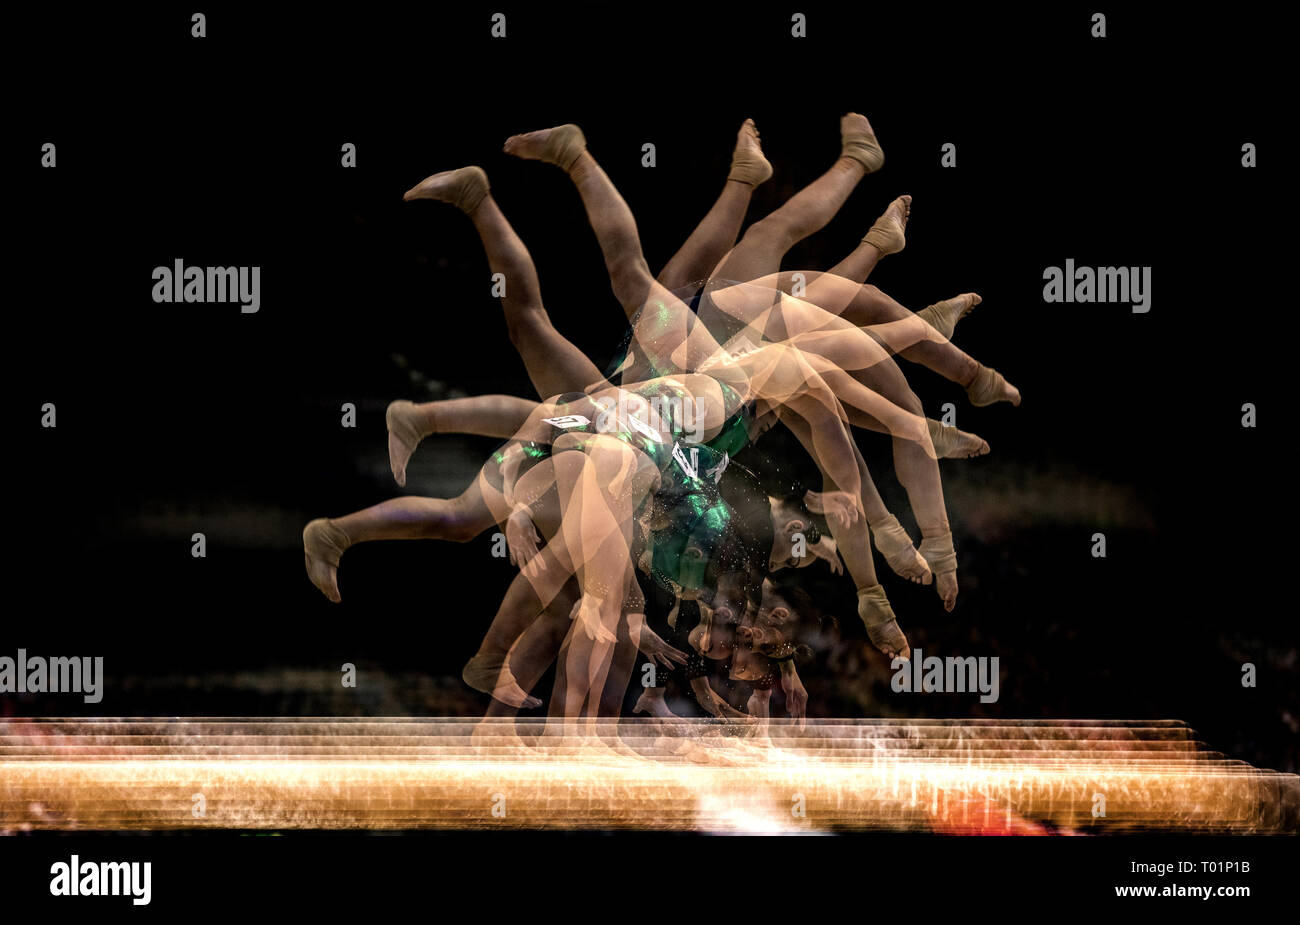 Sarah McKenzie from City of Glasgow Gymnastics club during the Gymnastics British Championships 2019 at the M&S Bank Arena, Liverpool. Stock Photo